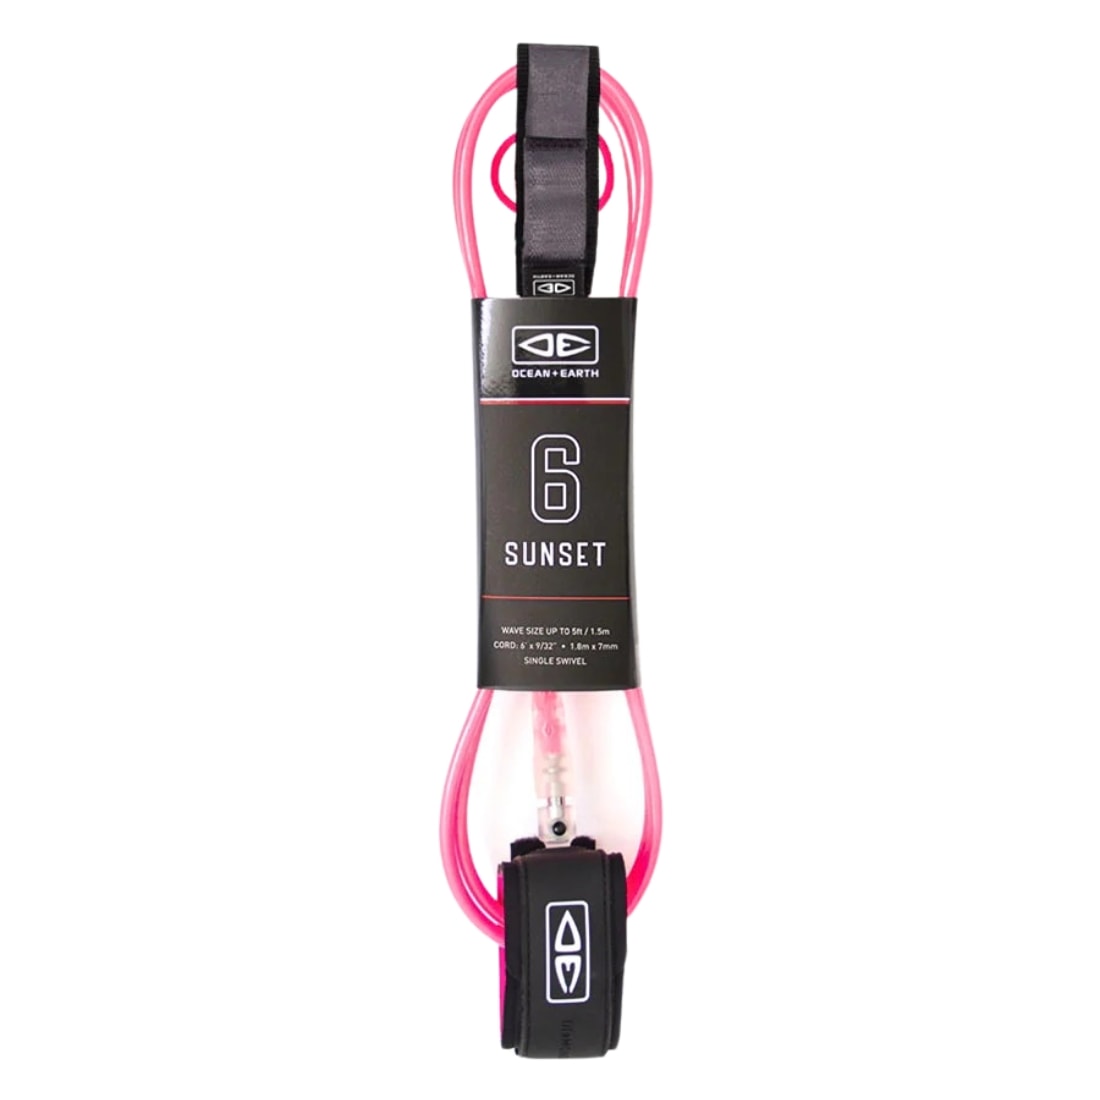 Ocean And Earth 6Ft Sunset Surfboard Leash - Pink - 6ft Surfboard Leash by Ocean and Earth 6ft